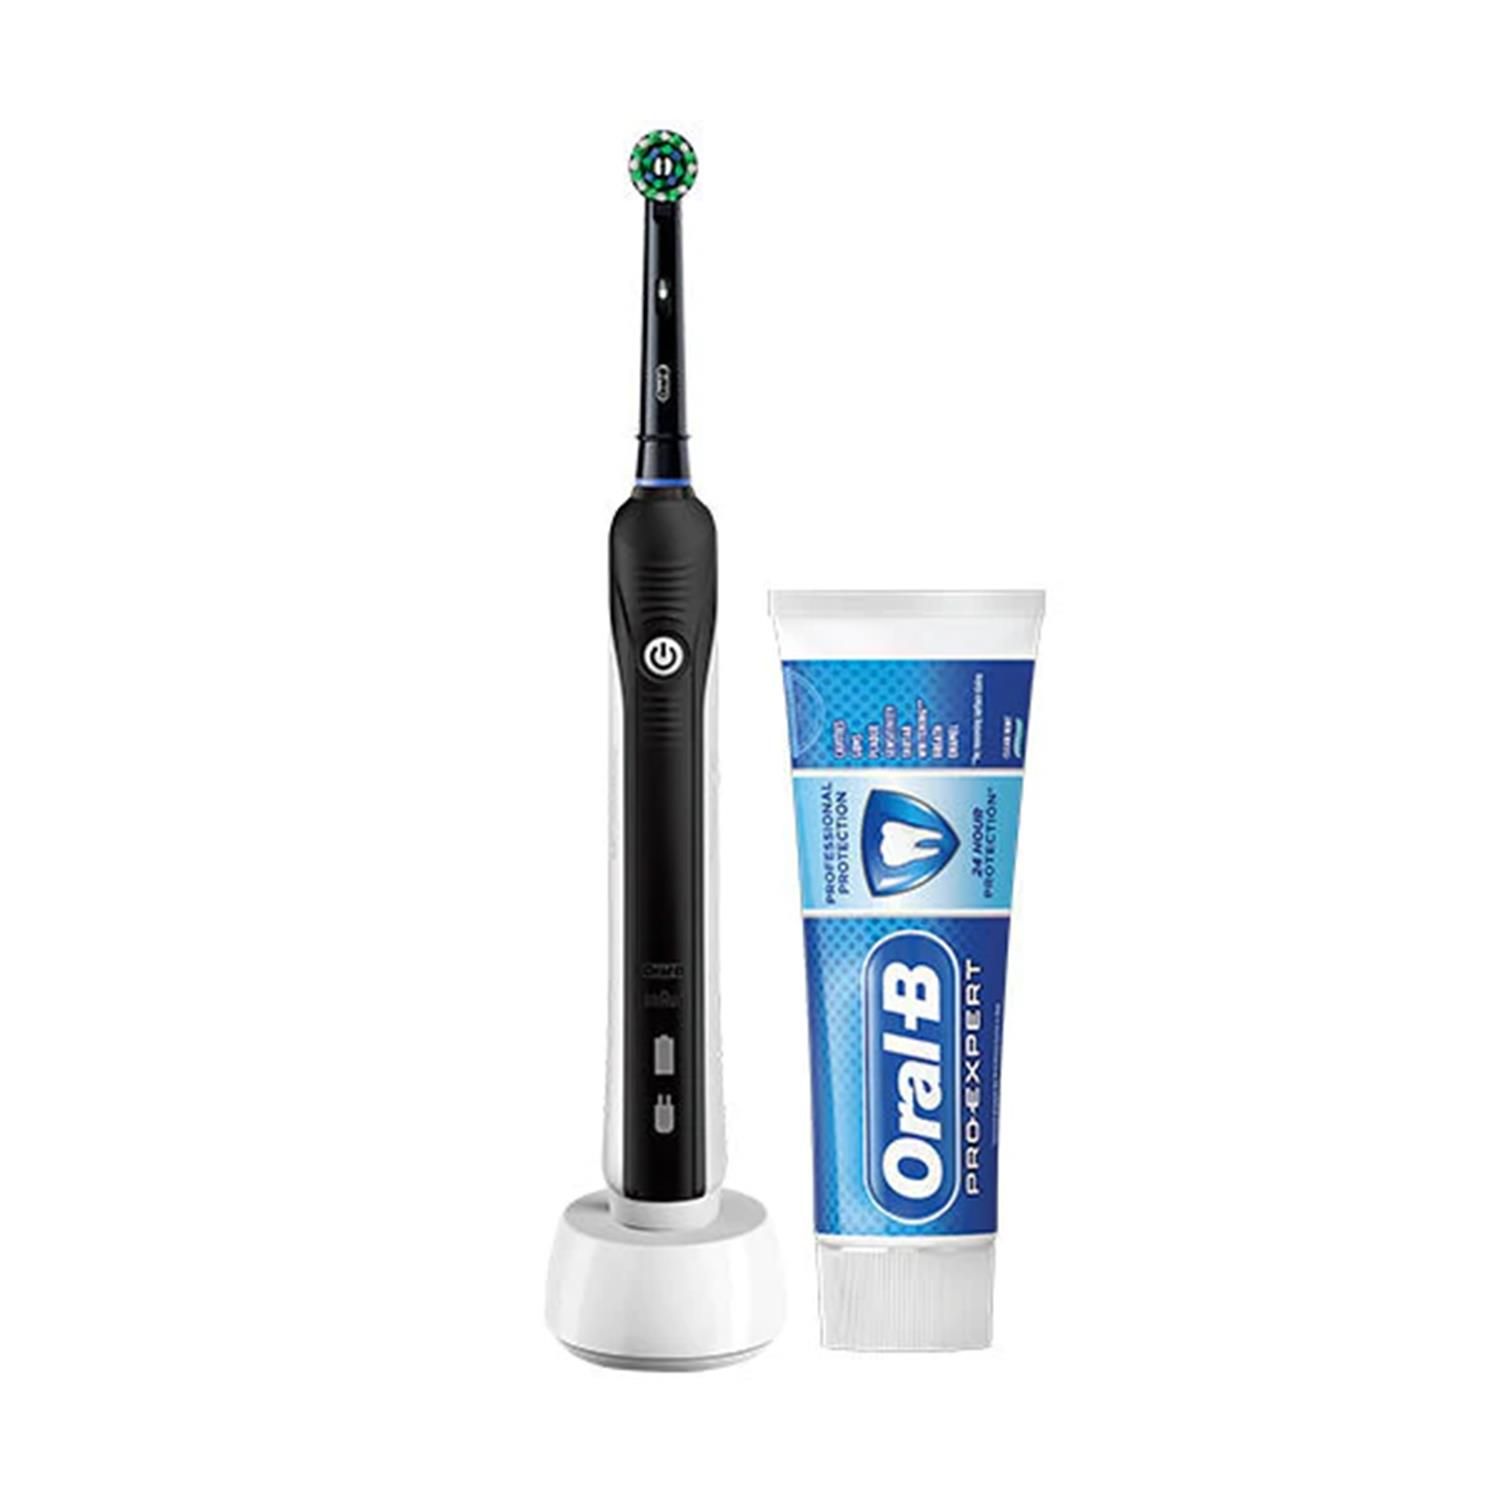 Oral-B Pro 1 - 650 - Black Electric Toothbrush with Toothbrush Head & Bonus Pro-Expert Professional Protection Toothpaste

Experience Oral-B Pro 1 from the #1 brand used by dentists worldwide. The Pro 1 electric toothbrush helps you brush like your dentist recommends for 2 minutes with the professional timer and it notifies you every 30 seconds to change the area you are brushing. While you are just moving the brush around your mouth, Oral-B's unique round head does all the rest. It removes up to 100% more plaque than a standard manual toothbrush for healthier gums, and it starts making your smile whiter as of the first day of brushing by removing surface stains. With the professional timer, Oral-B Pro 1 is a great toothbrush for everyone who wants to switch to an electric toothbrush.

To promote optimal brushing this toothbrush has a pressure control feature installed. If too much pressure is applied, the movement of the brush head will continue but its pulsation will stop. In addition, you will also hear a different sound while brushing.

Features:
Digital Display: N
Electric: Y
Power Type: Battery
Rechargeable: Y
DEEP CLEANING with 3D TECHNOLOGY, oscillates, rotates and pulsates to remove up to 100% more plaque vs. a manual brush
Roundhead cleans better for healthier gums
Battery lasts up to 10 days
Helps you brush longer with the 2 minutes embedded timer
Internal pressure control - pulsation stops if you brush too hard

Package Contains:
1 x Black Electric Toothbrush
1 x Toothbrush Head
1 x Oral-B Pro-Expert Professional Protection Toothpaste